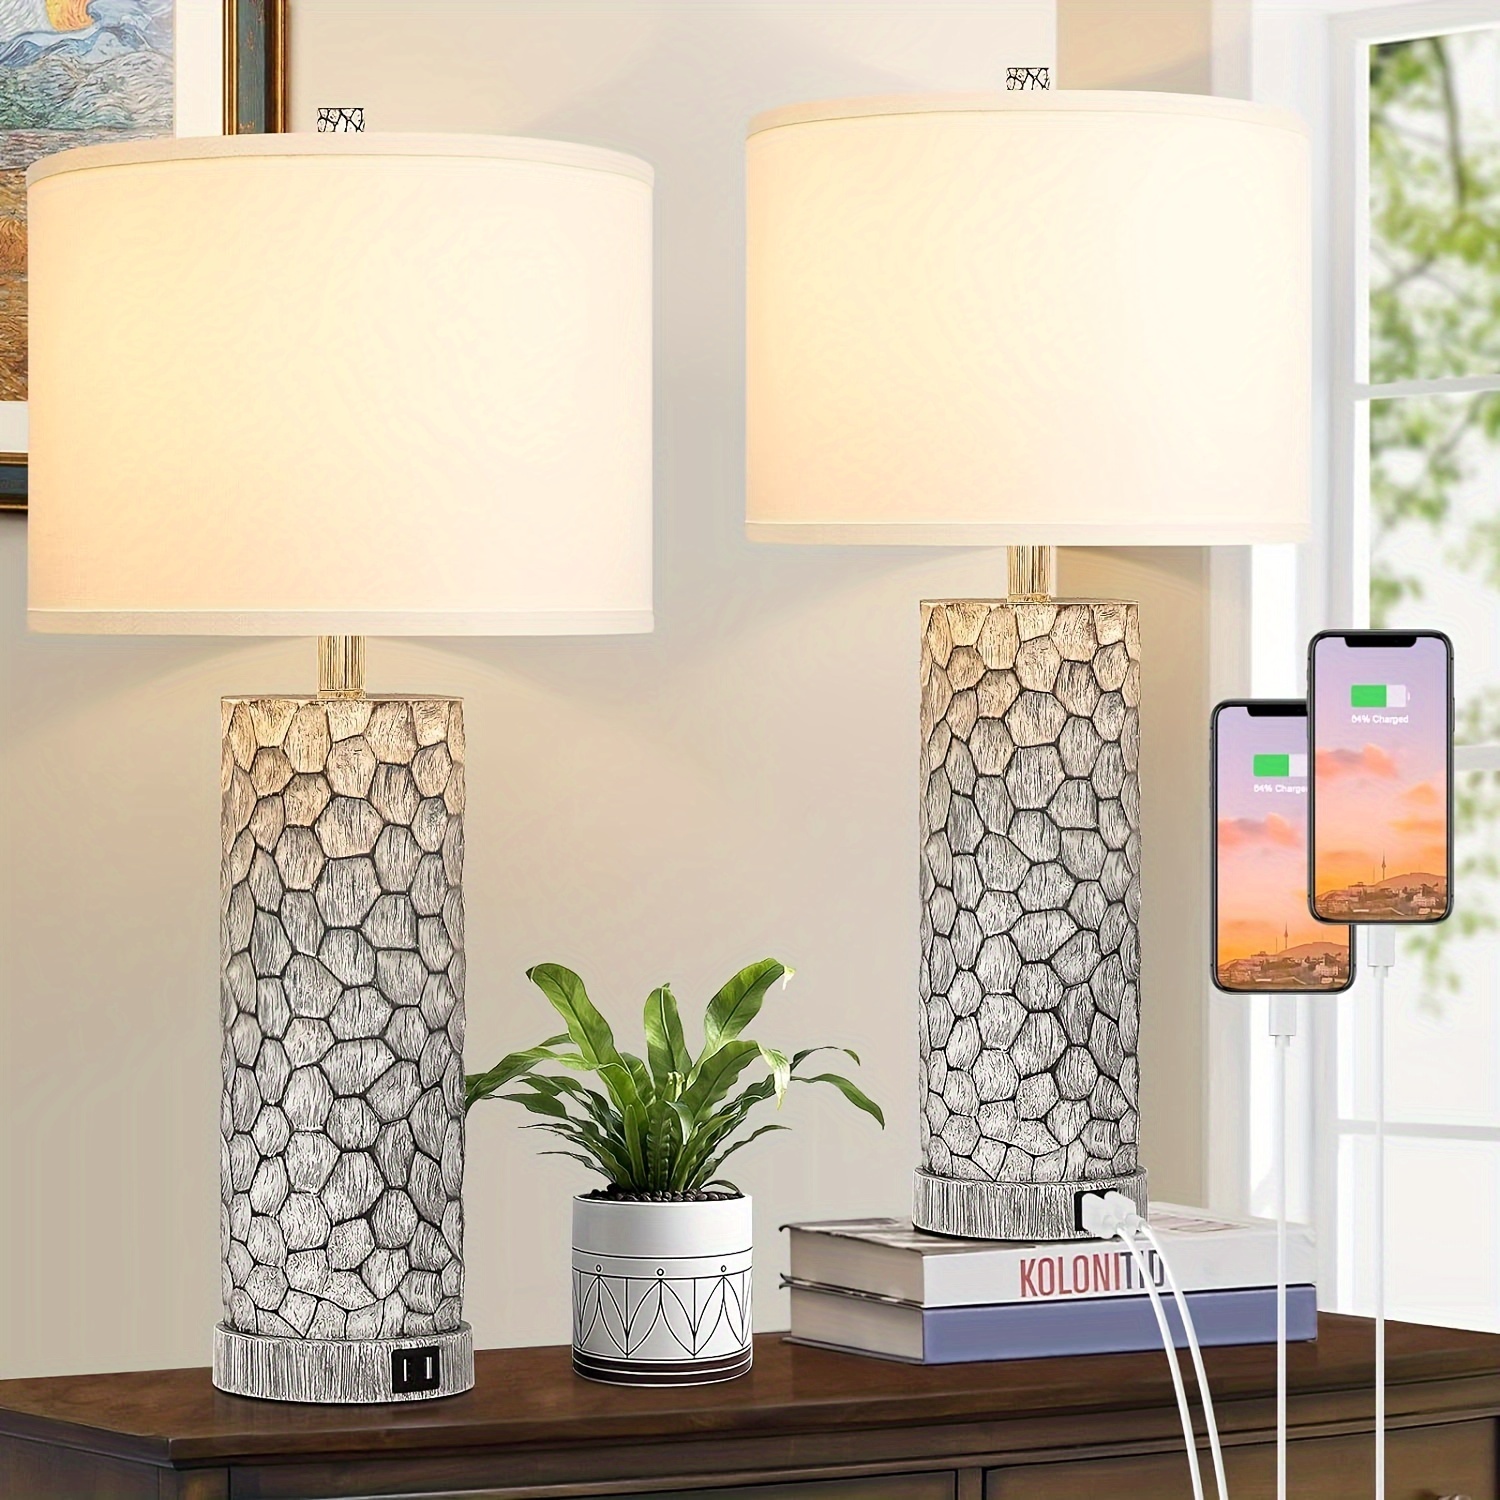 

Table Lamps With Dual Usb Charging Ports Set Of 2 For Bedroom Living Room, 25" Tall Rustic Farmhouse Desk Lamps With White Fabric Shade, Bedside Nightstand Lamps